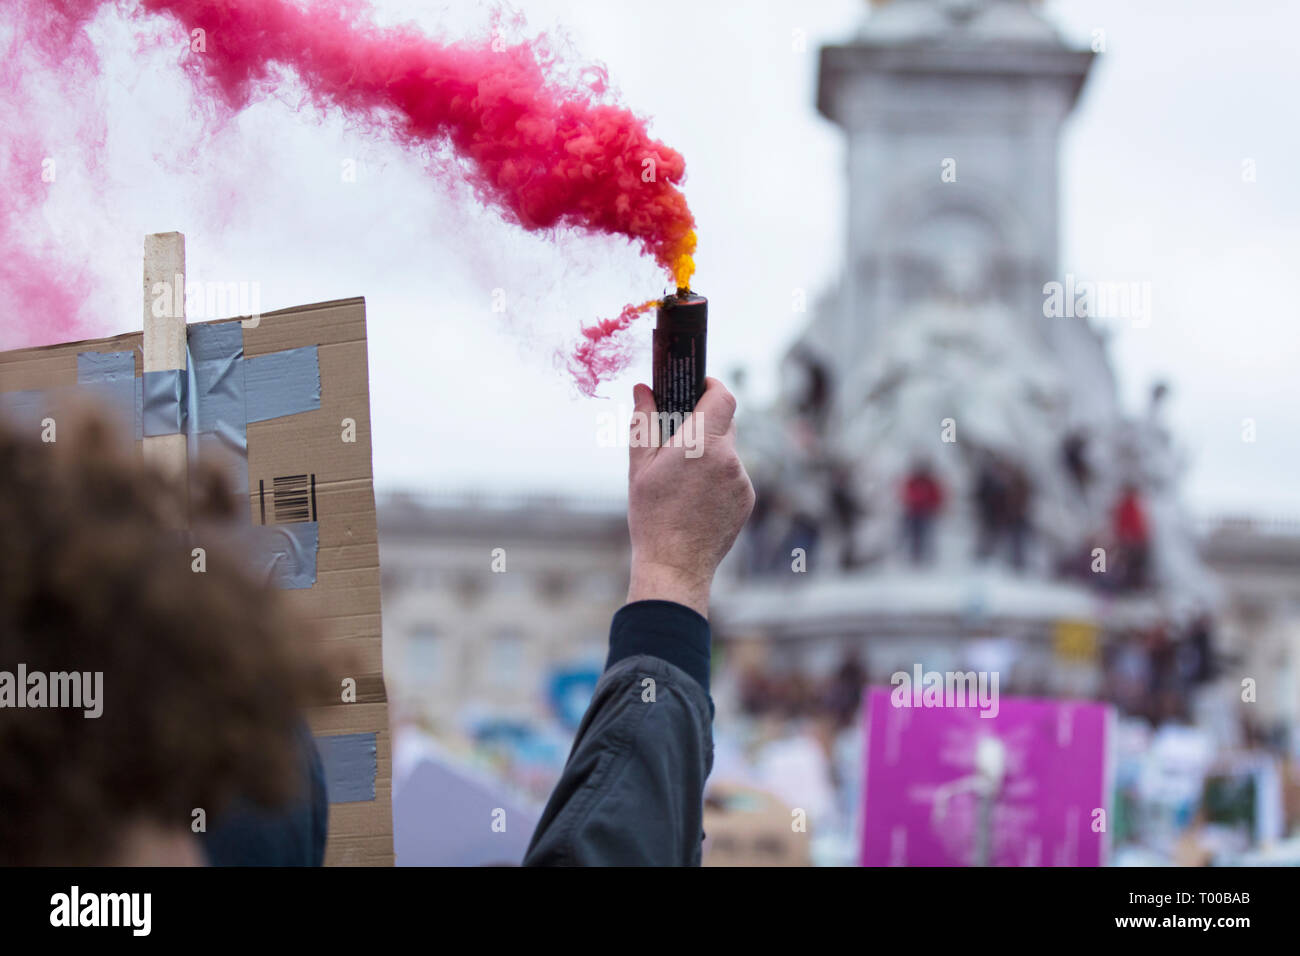 A protestor holds a smoke bomb at a political demonstration Stock Photo